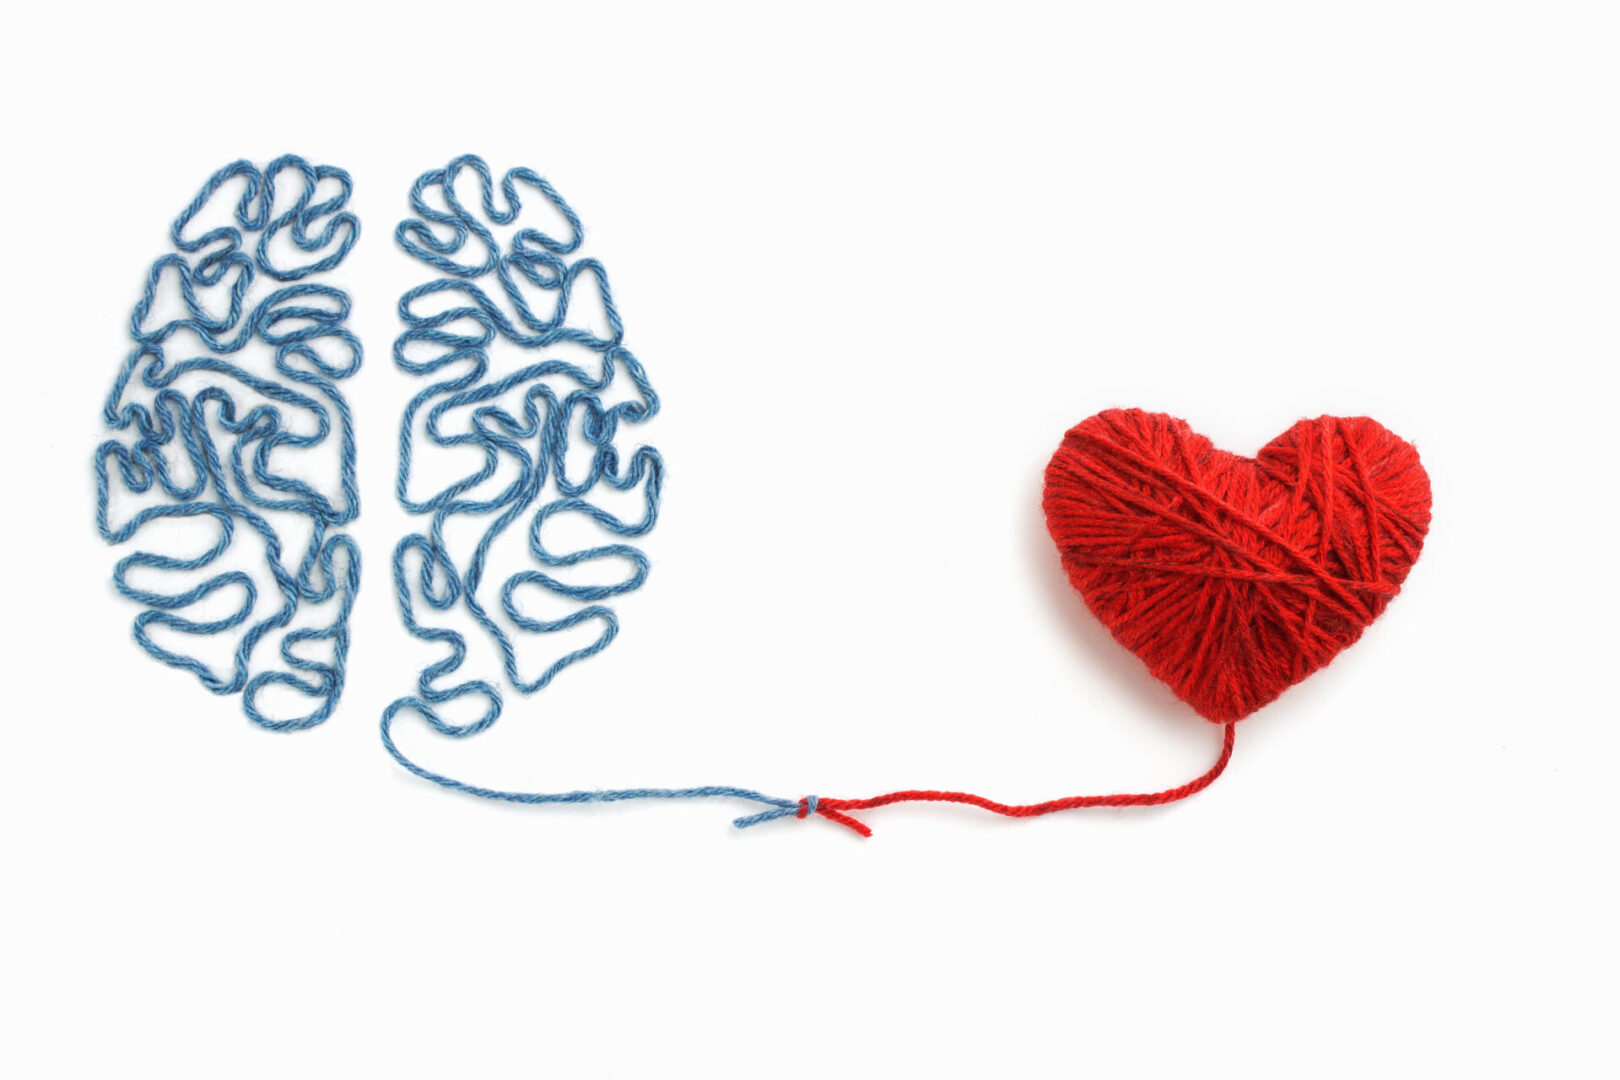 String Brain and Heart